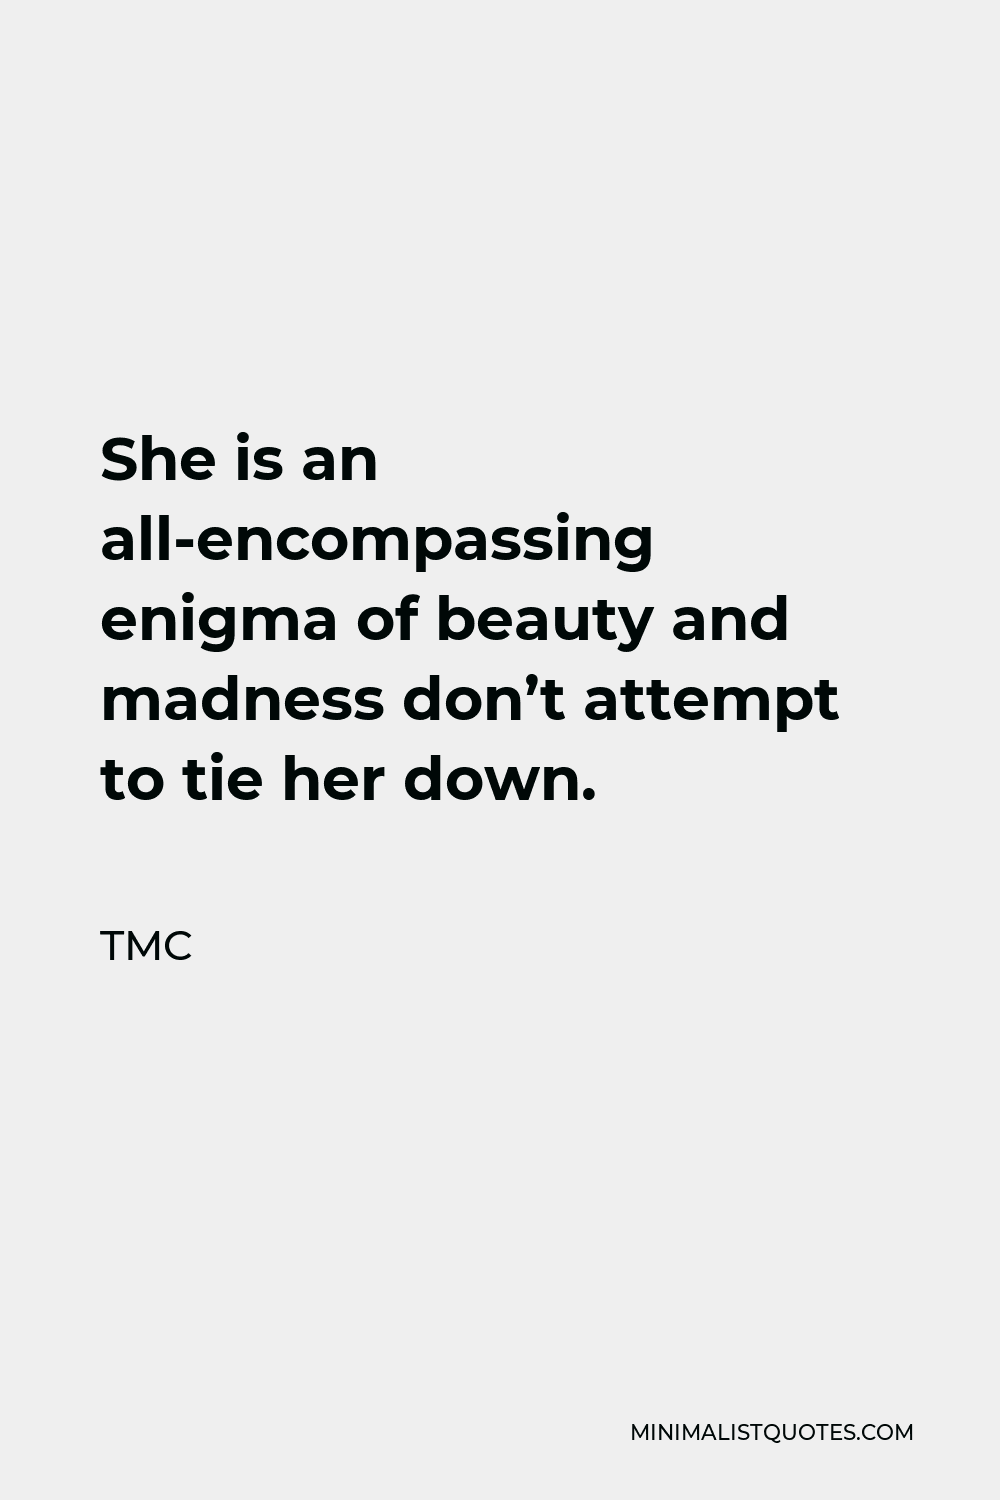 TMC Quote - She is an all encompassing enigma of beauty and madness don’t attempt to tie her down.